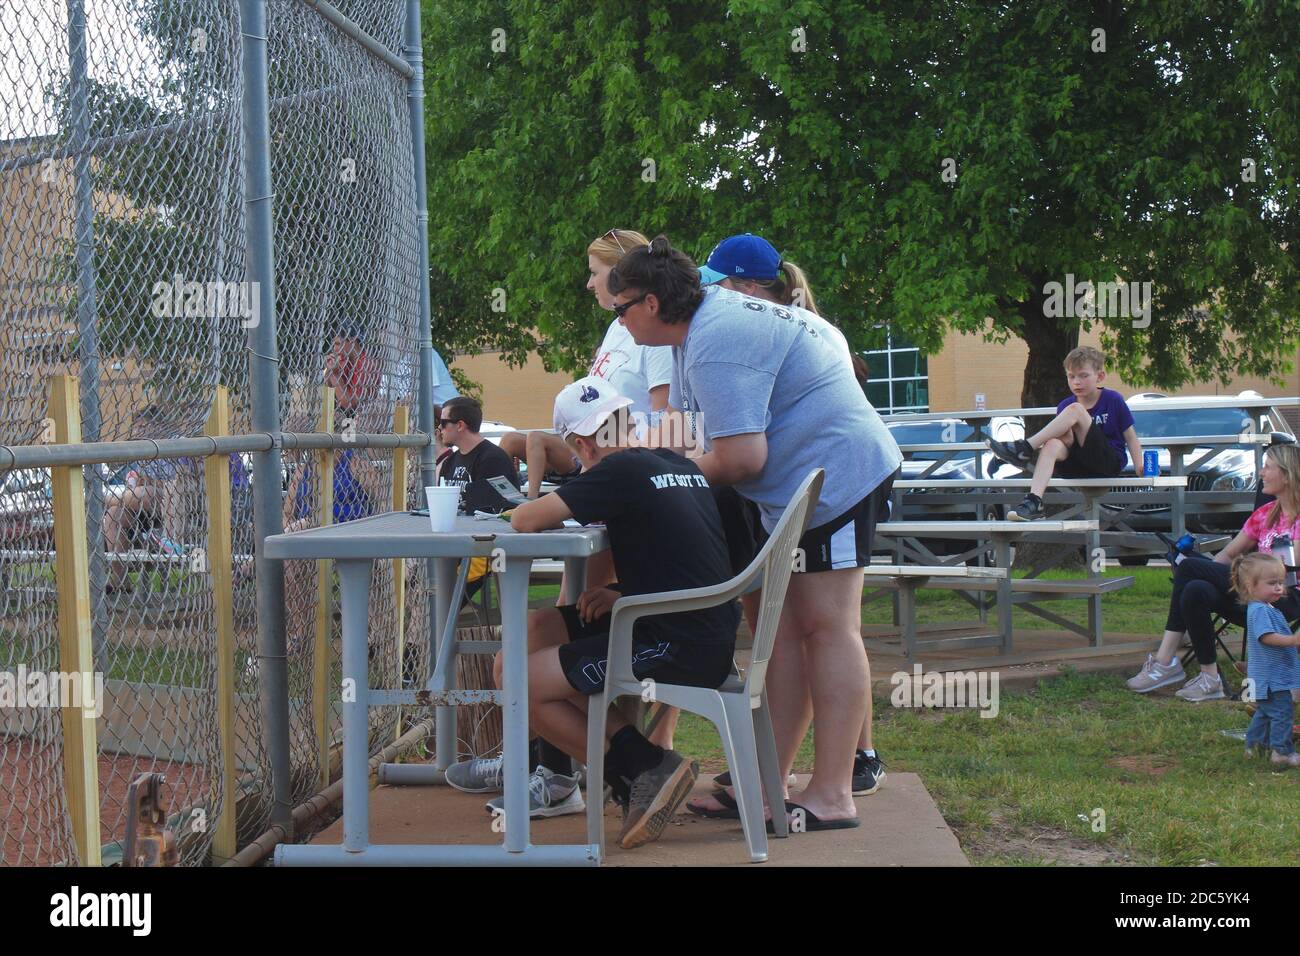 Girls Softball Game score keepers behind the chain link fence on a summer day in Kansas. Stock Photo